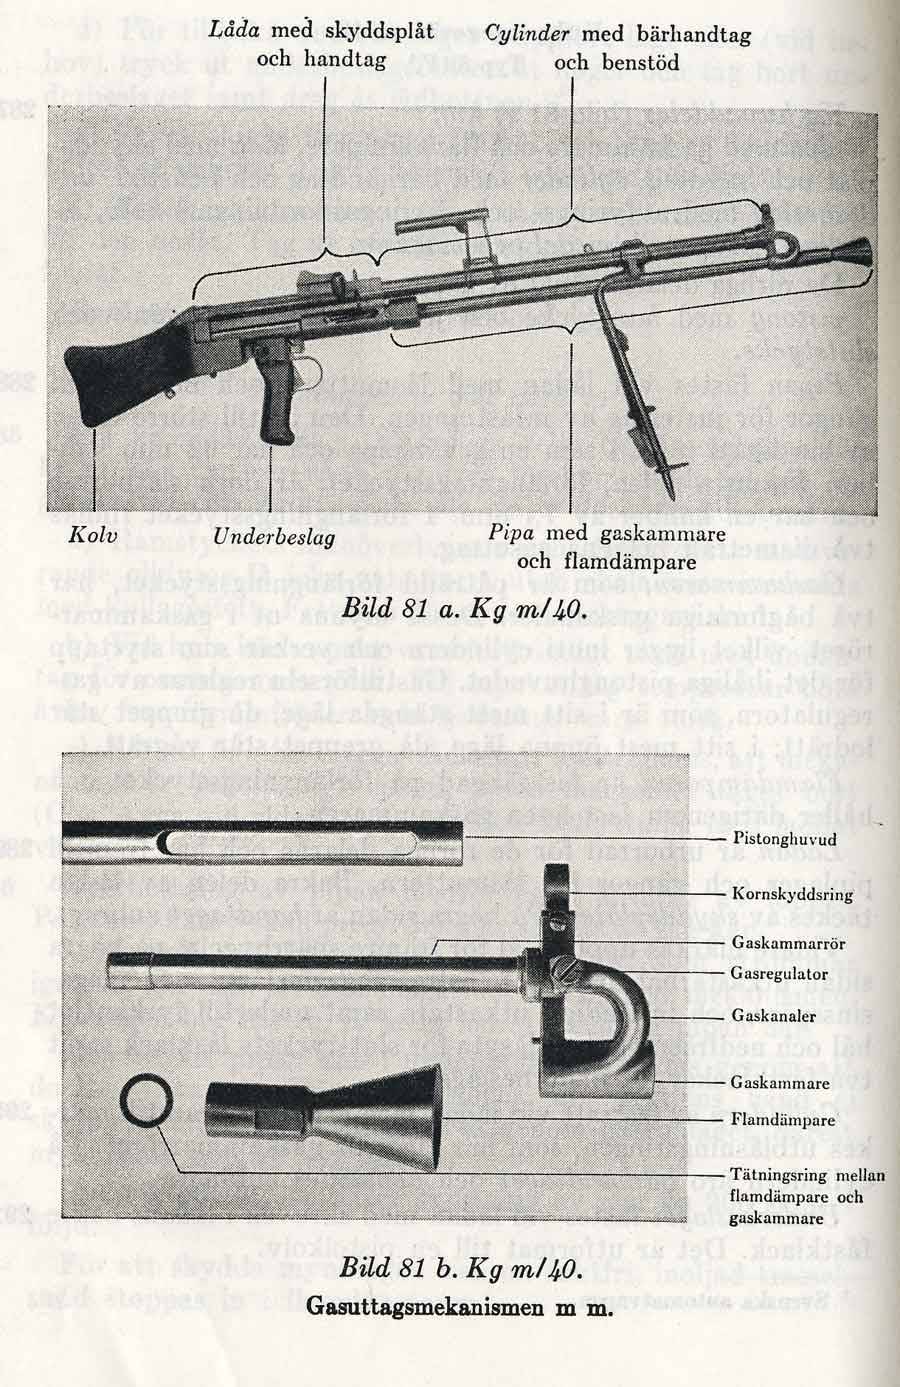 How machine guns appeared. The epic Knorr-Bremse M40